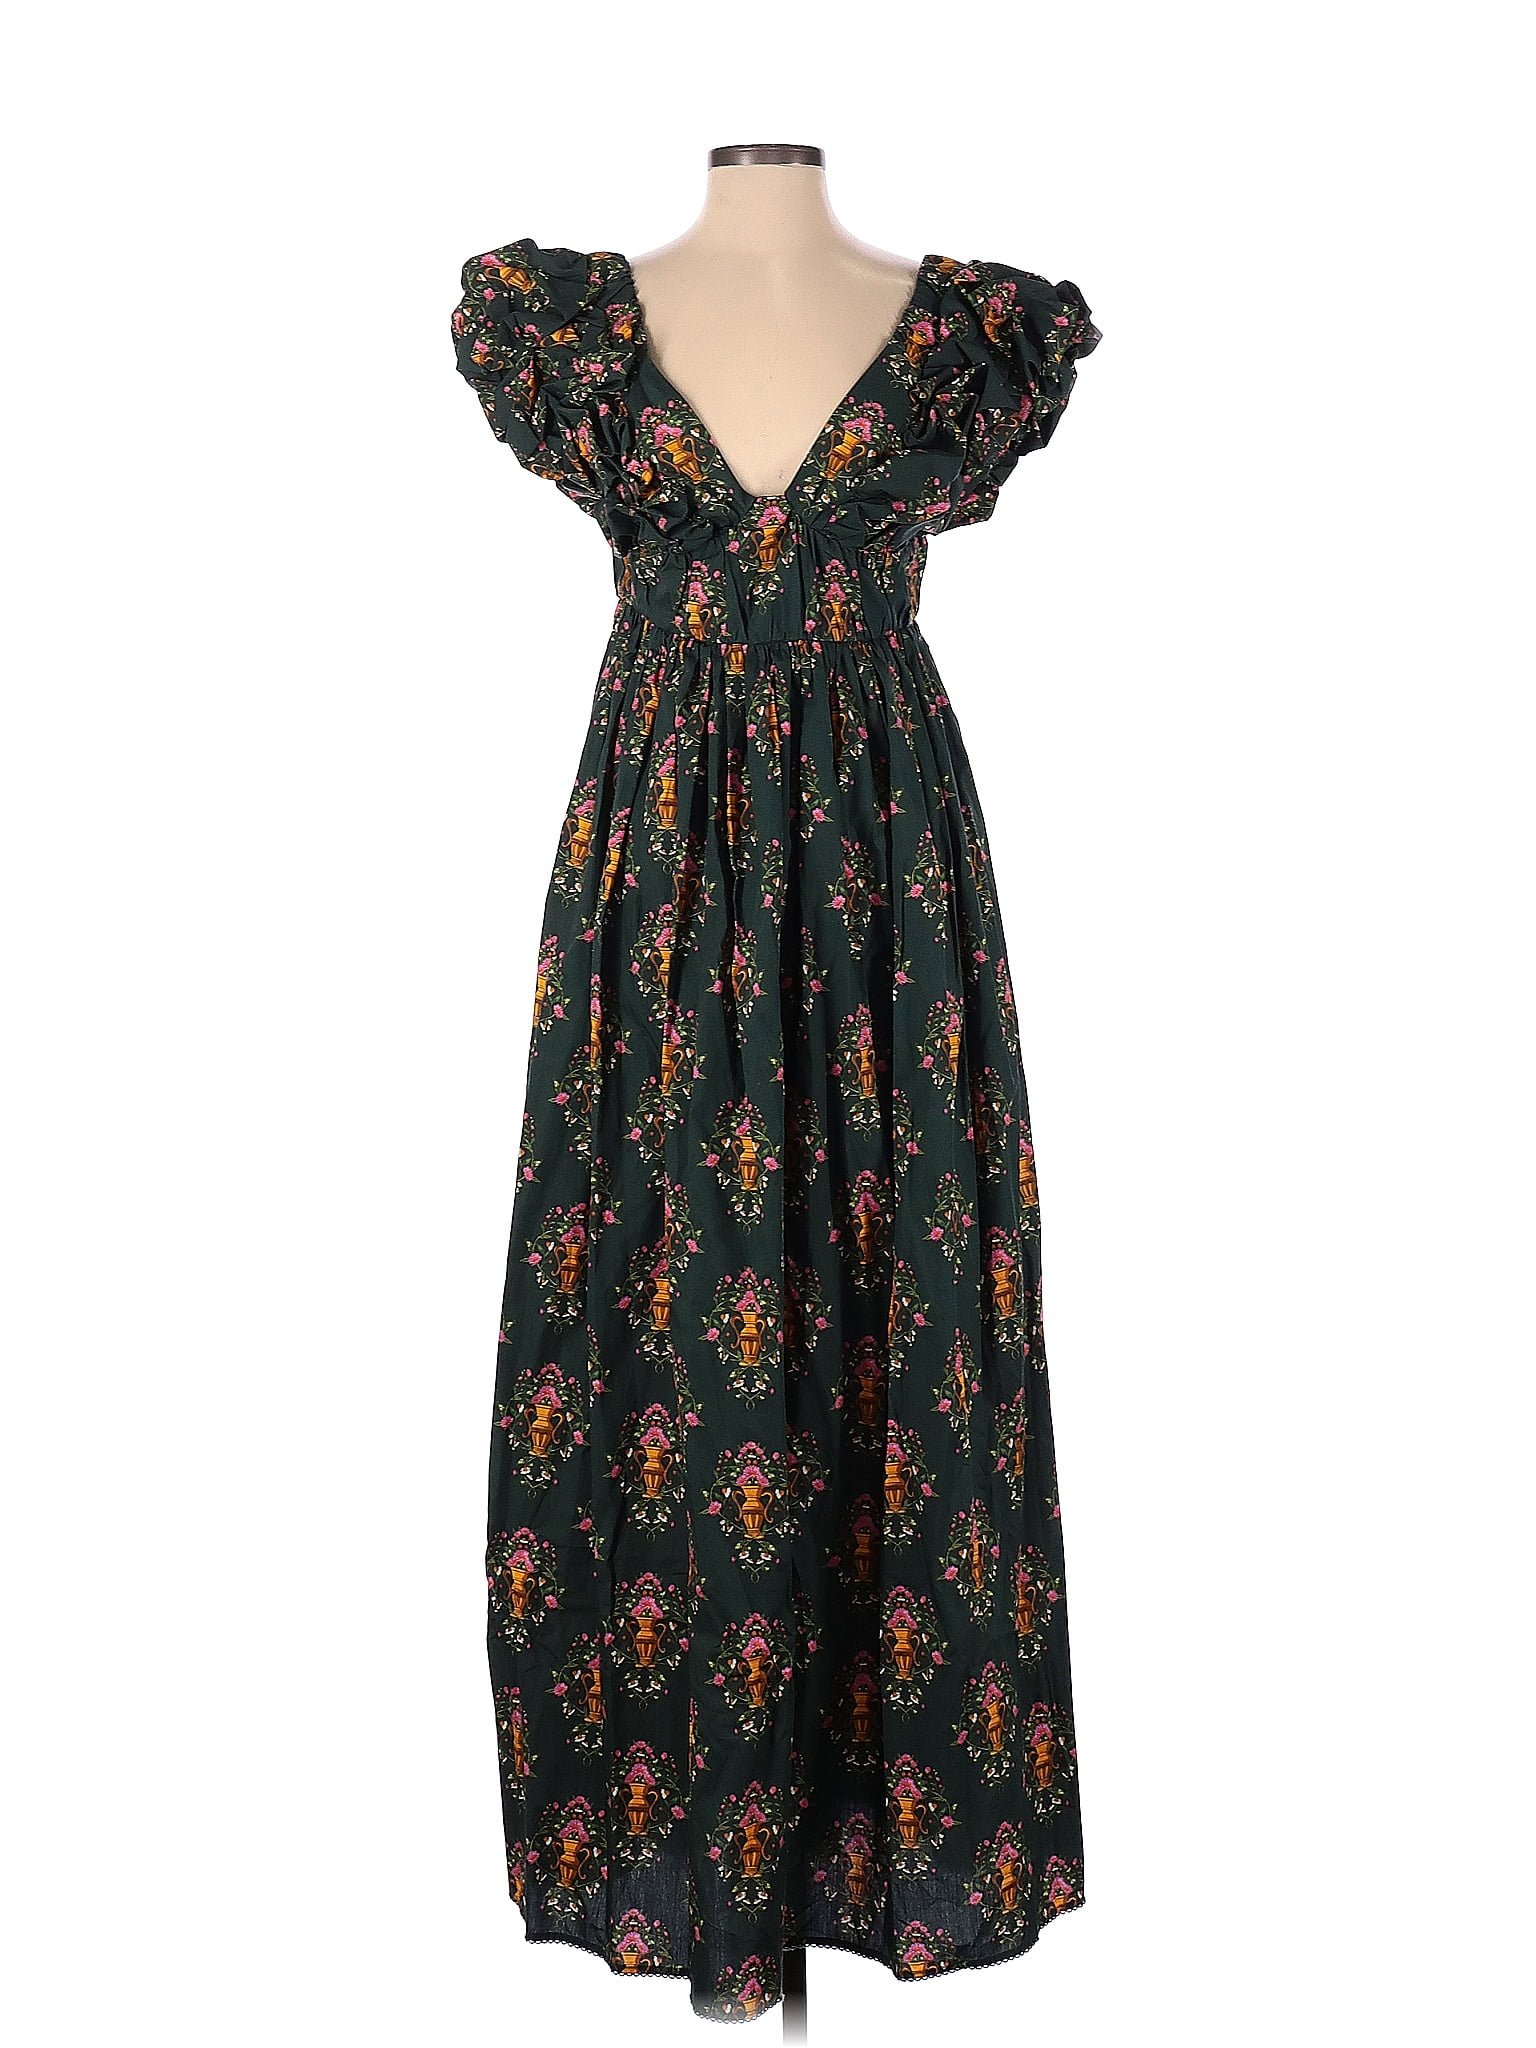 Agua by Agua Bendita 100% Cotton Floral Green Casual Dress Size S - 24% ...